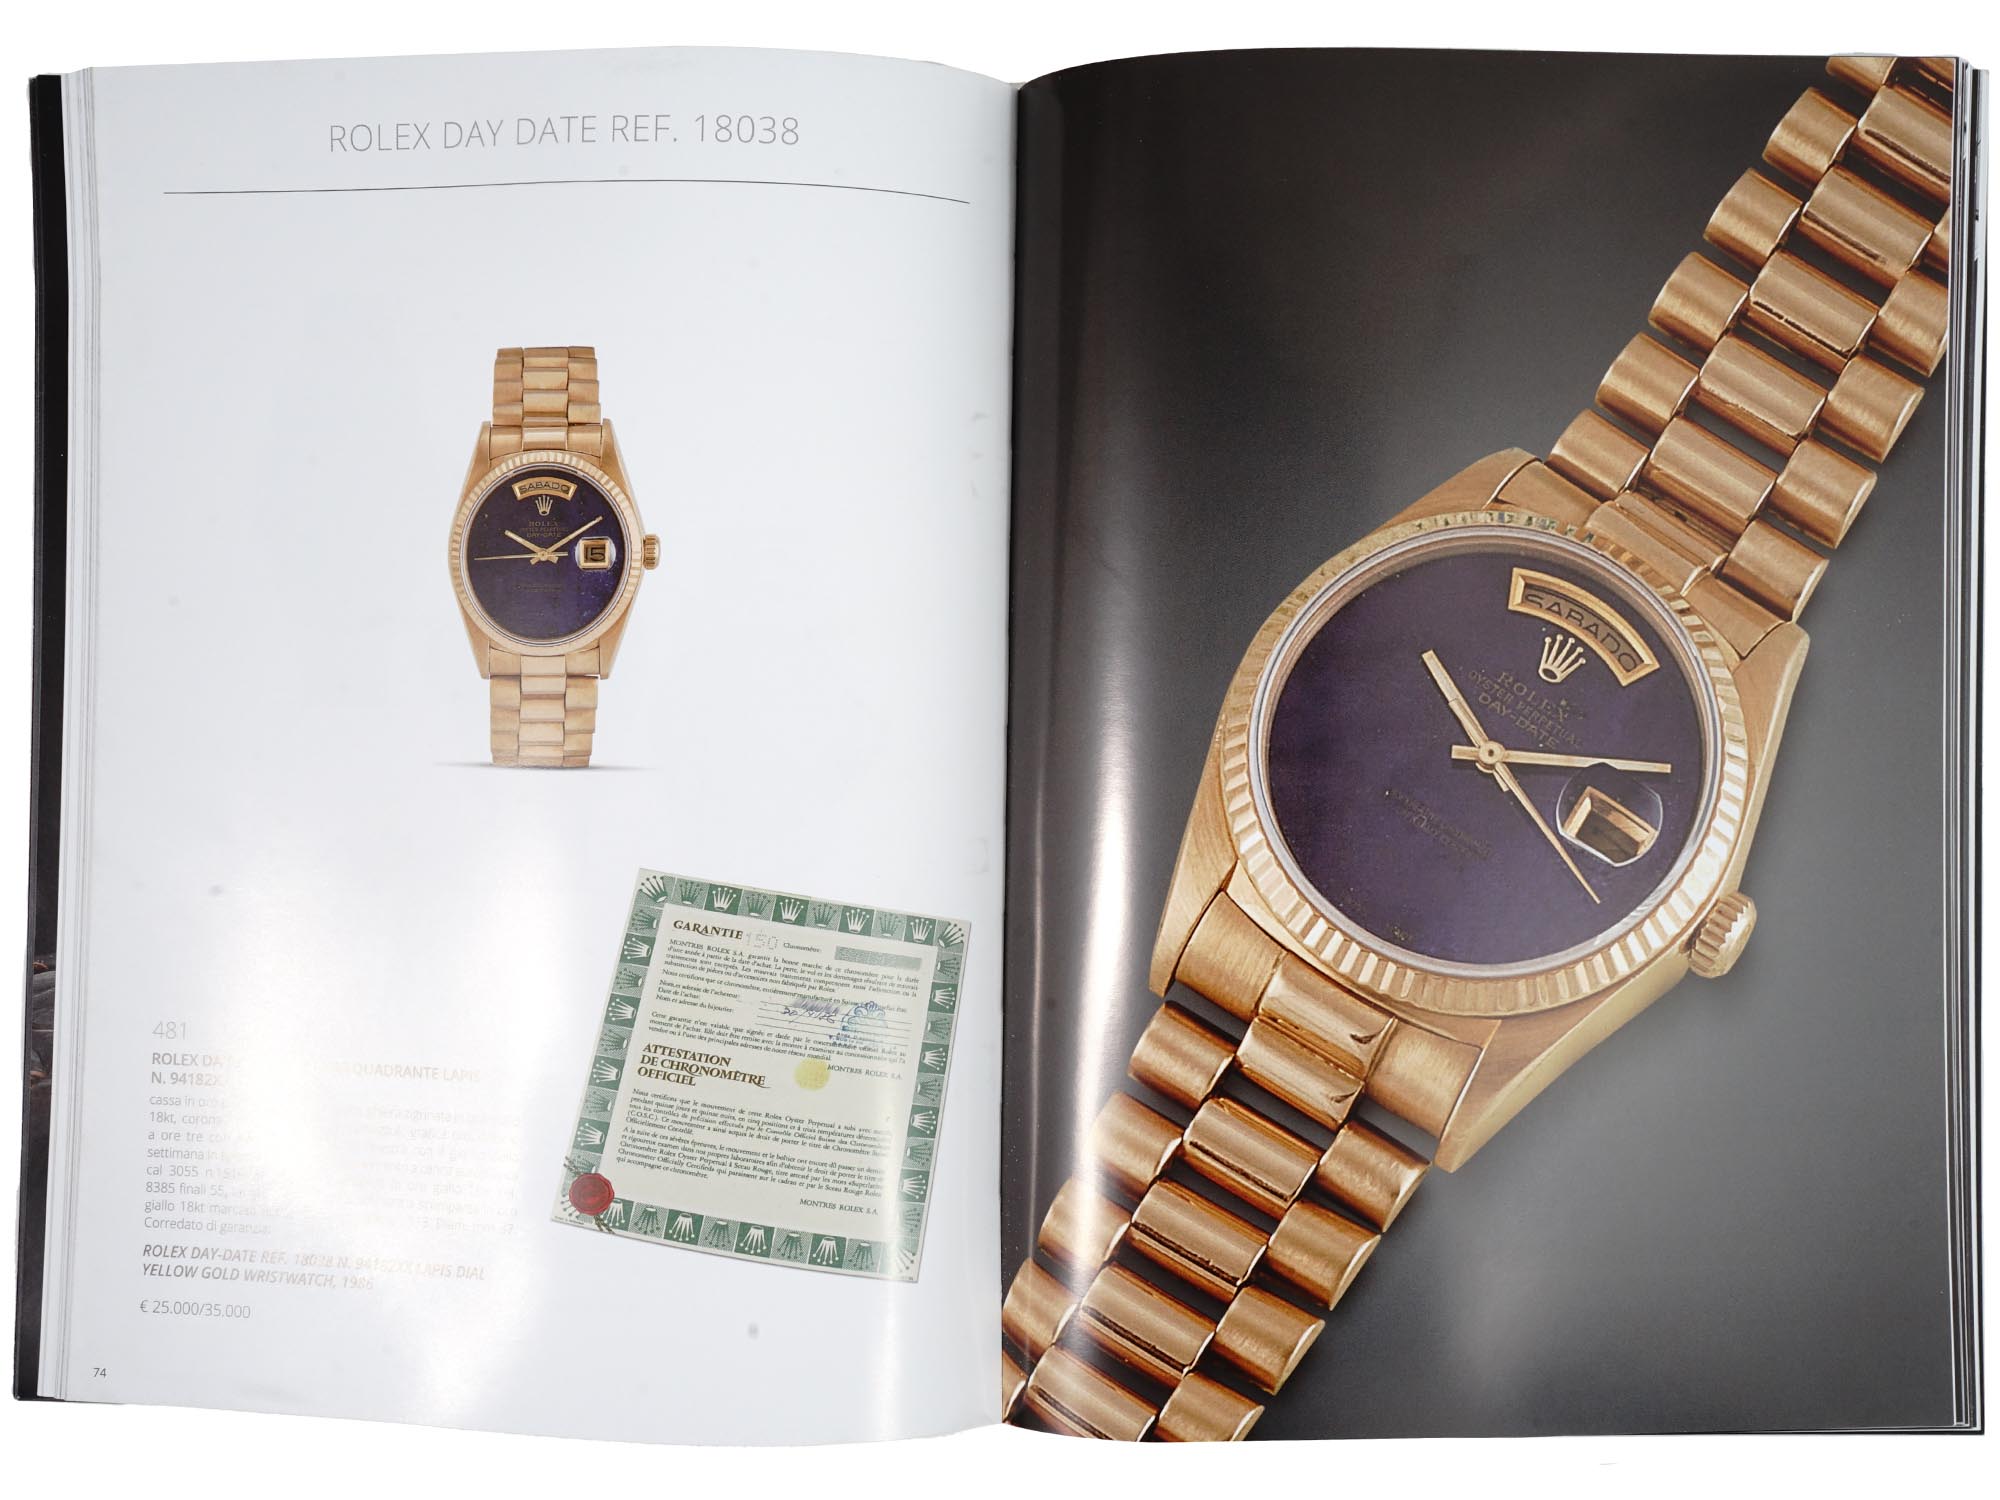 VINTAGE JEWELRY AND TIMEPIECES AUCTION CATALOGUES PIC-16